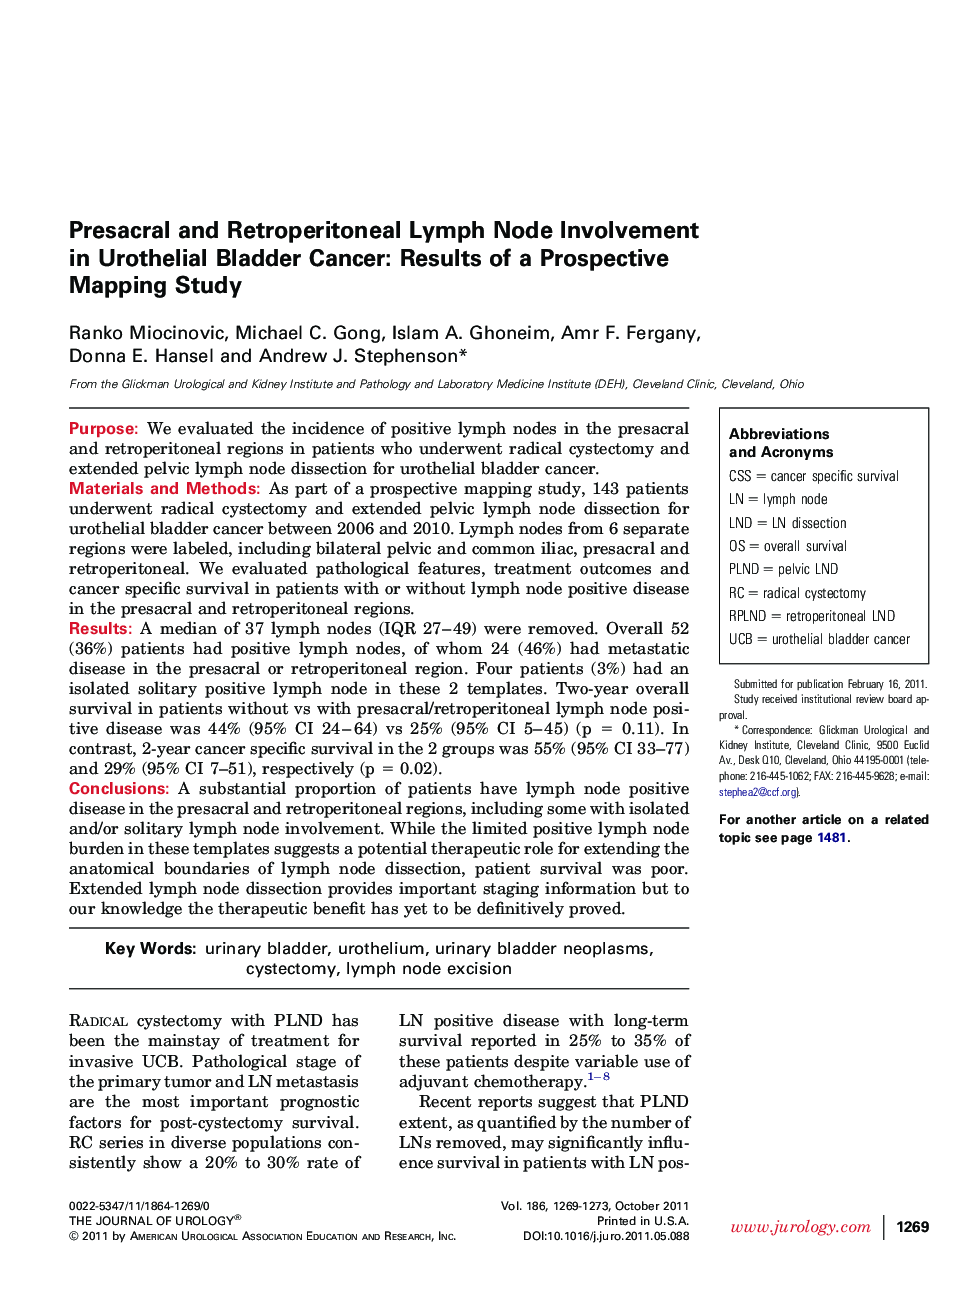 Presacral and Retroperitoneal Lymph Node Involvement in Urothelial Bladder Cancer: Results of a Prospective Mapping Study 